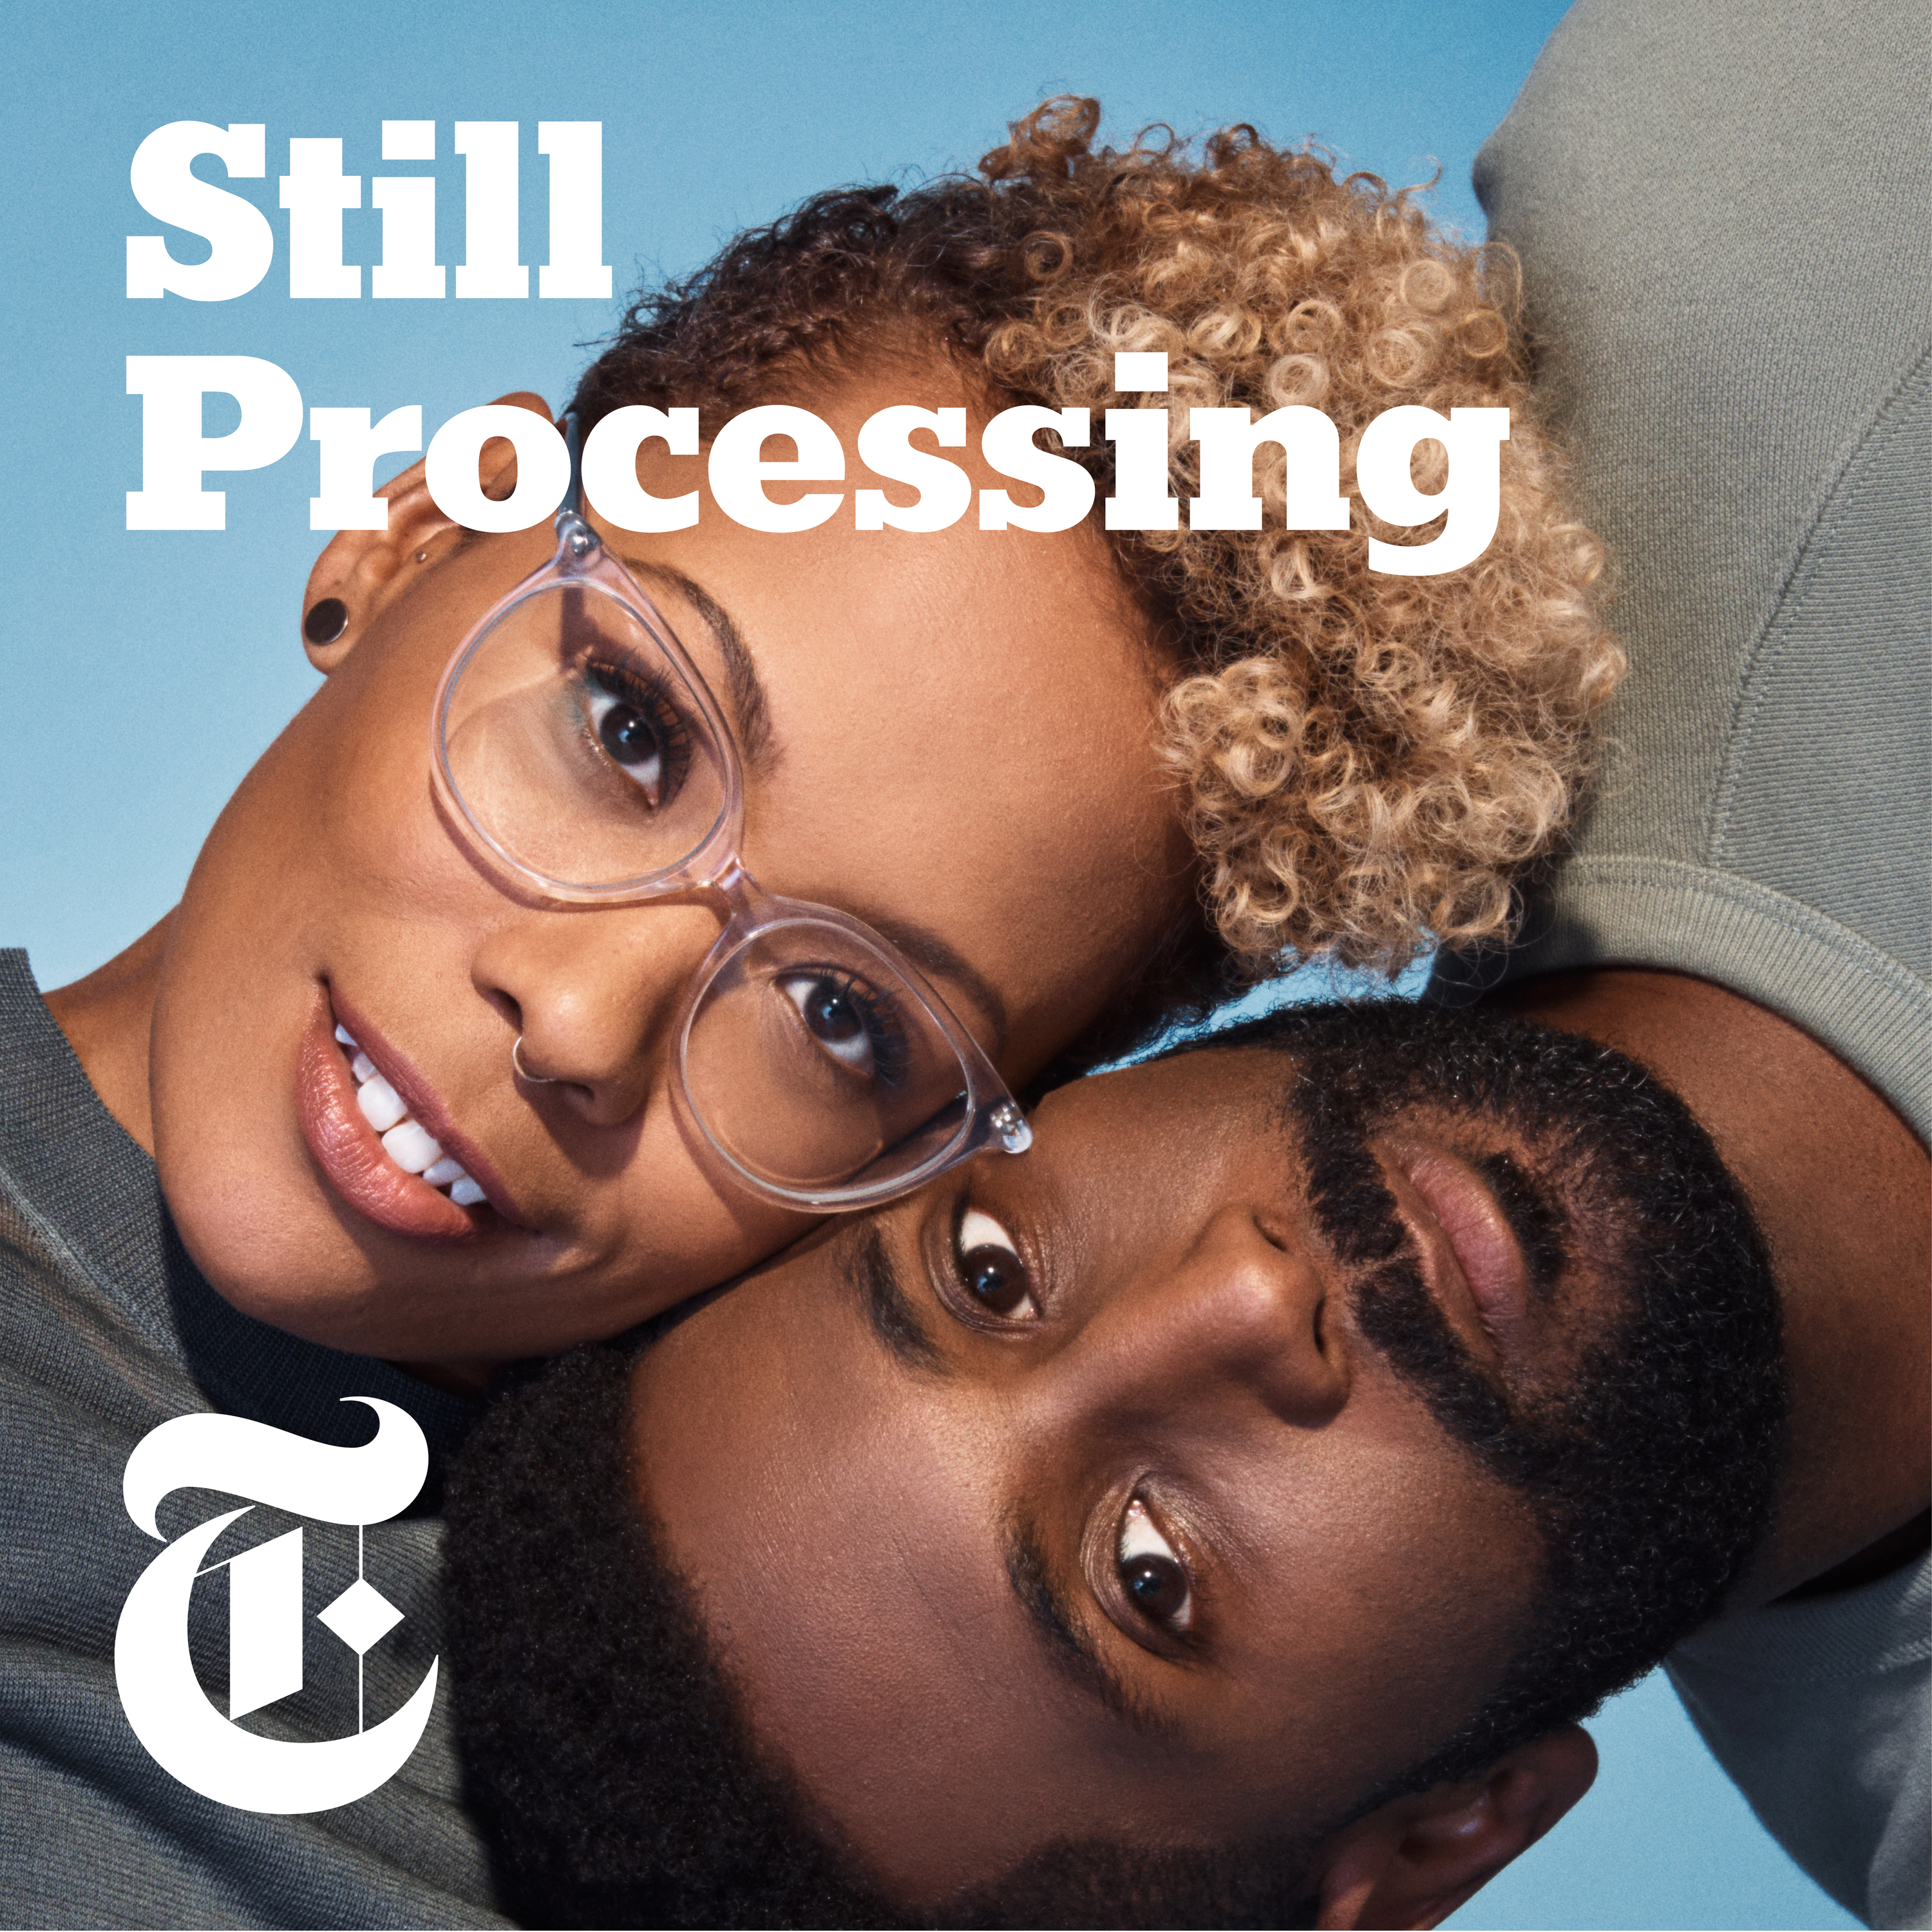 NYT’s Wesley Morris and His Problem with “White Fragility”